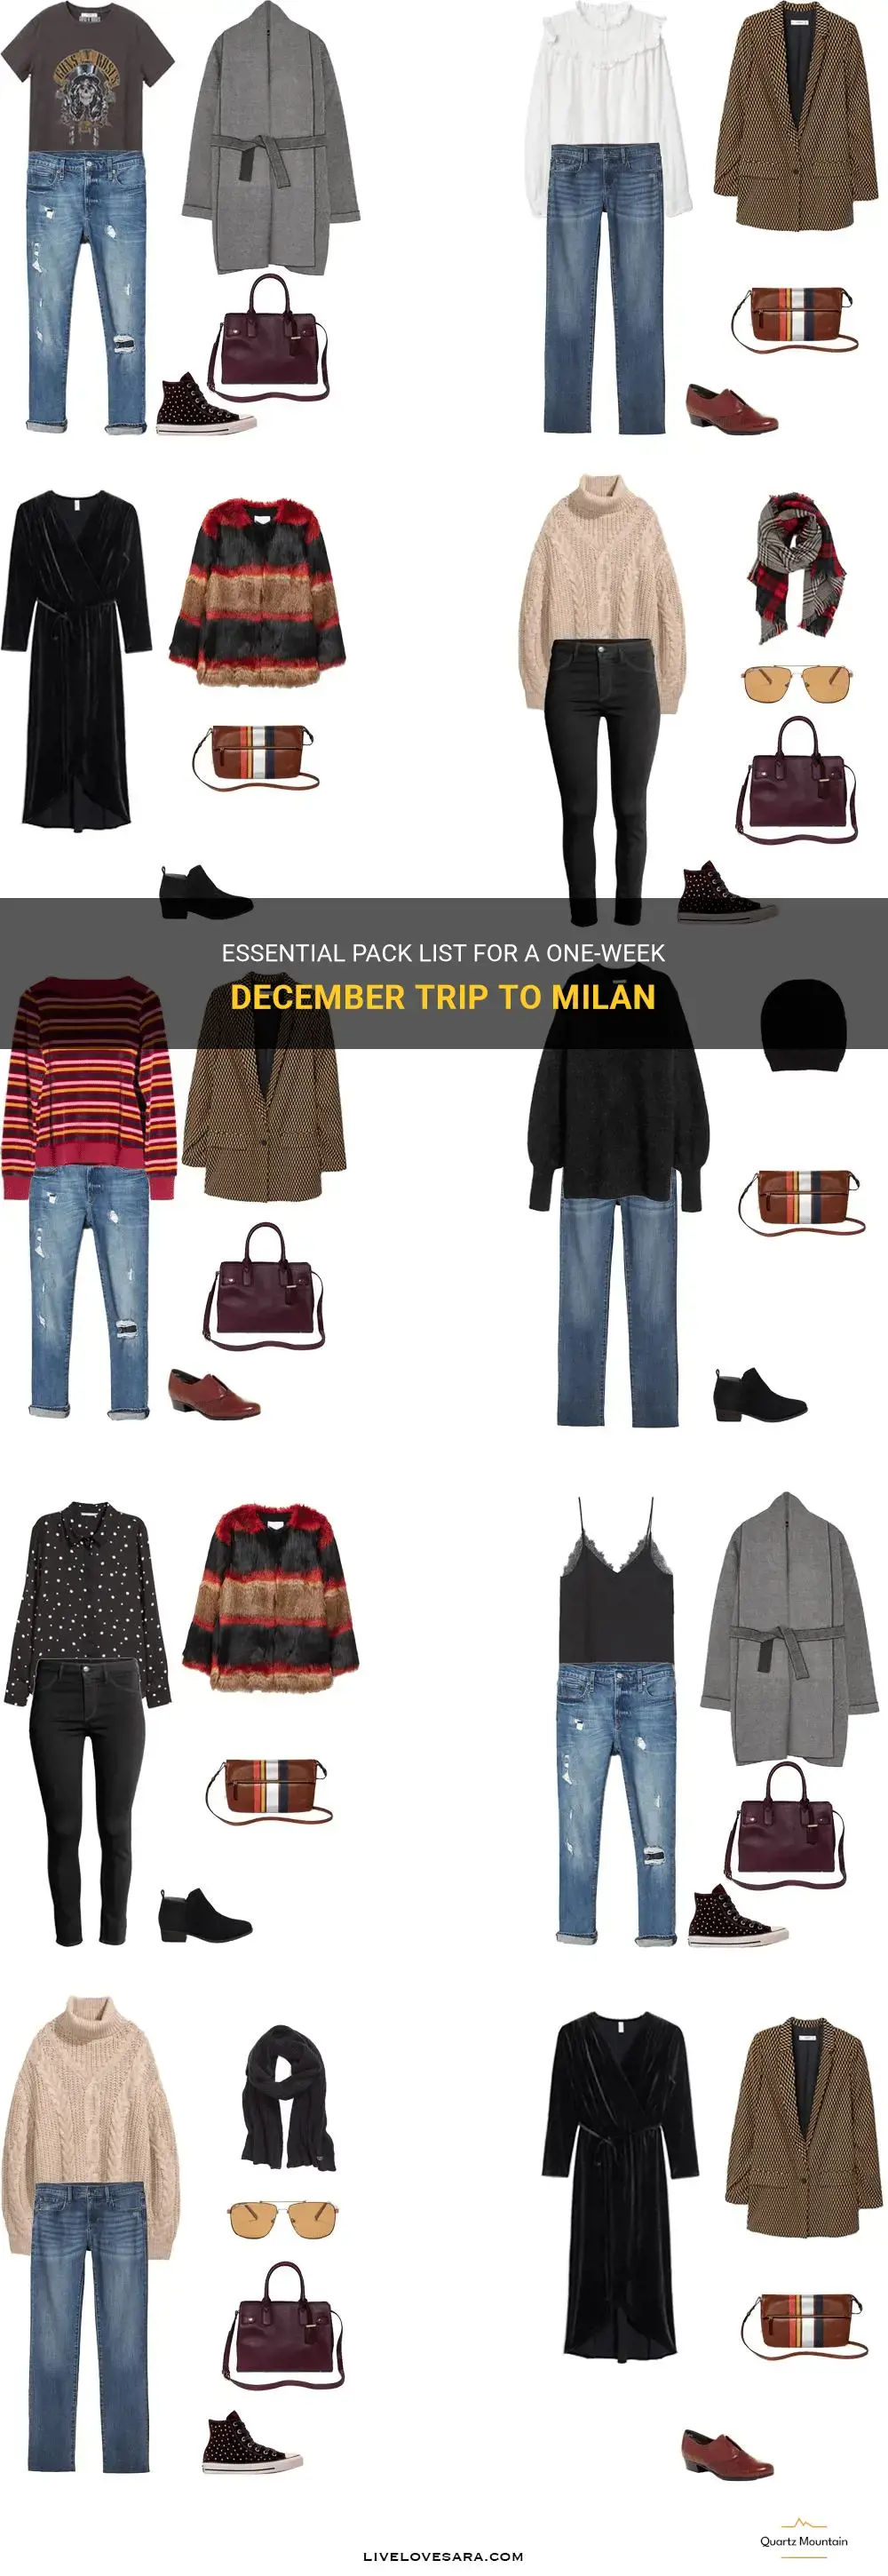 what to pack for 1 week in december to milan